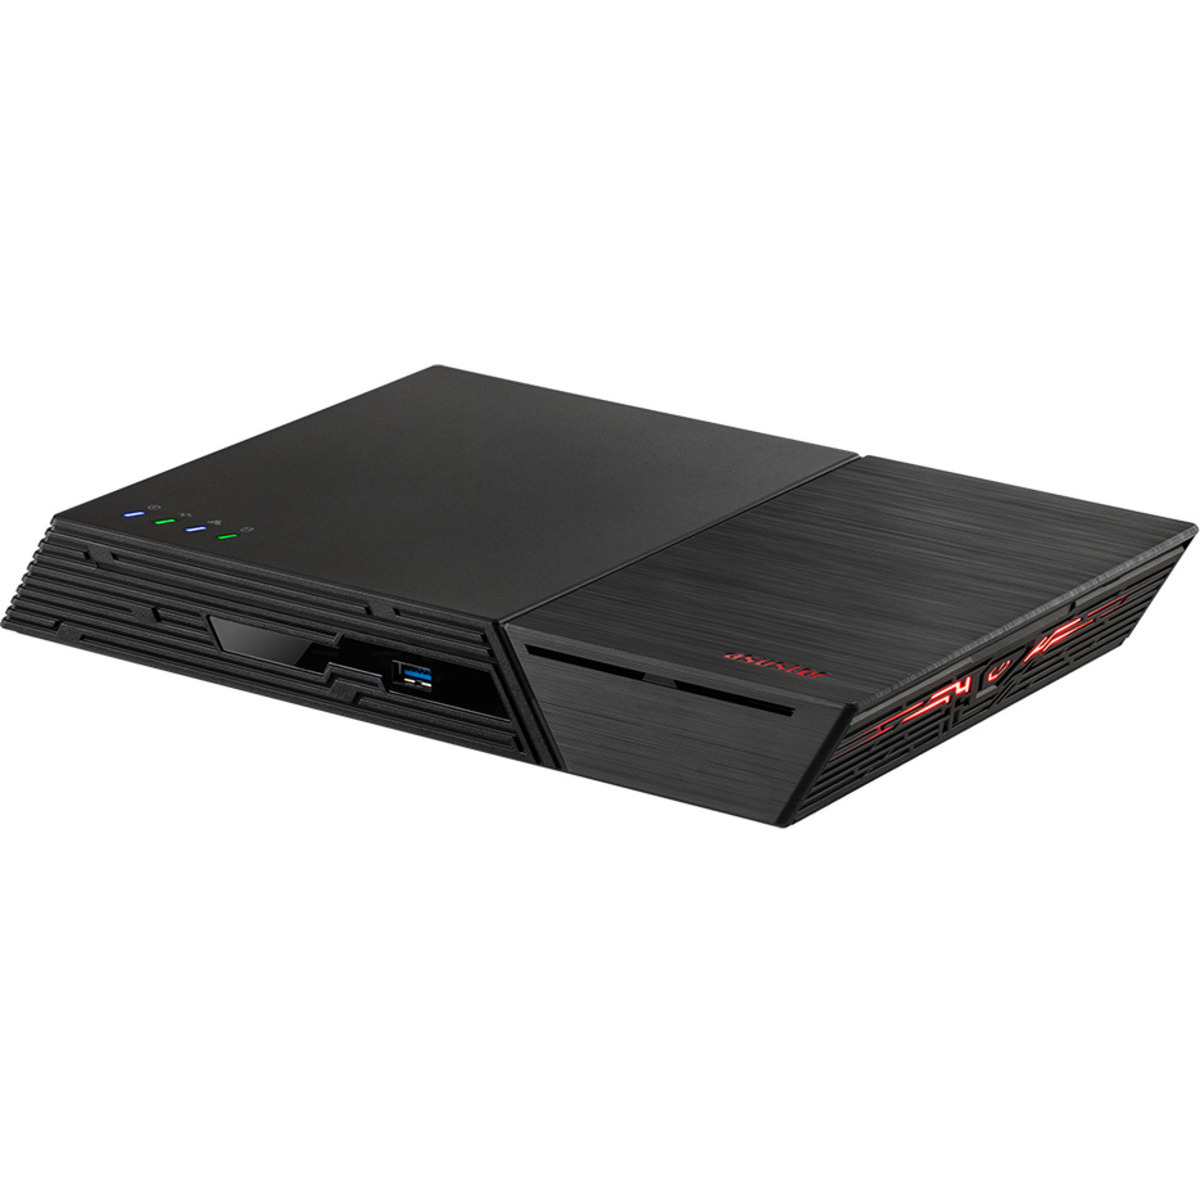 ASUSTOR FLASHSTOR 6 FS6706T 3tb 6-Bay Desktop Multimedia / Power User / Business NAS - Network Attached Storage Device 3x1tb Crucial P3 Plus CT1000P3PSSD8  5000/3600MB/s M.2 2280 NVMe SSD CONSUMER Class Drives Installed - Burn-In Tested - FREE RAM UPGRADE FLASHSTOR 6 FS6706T